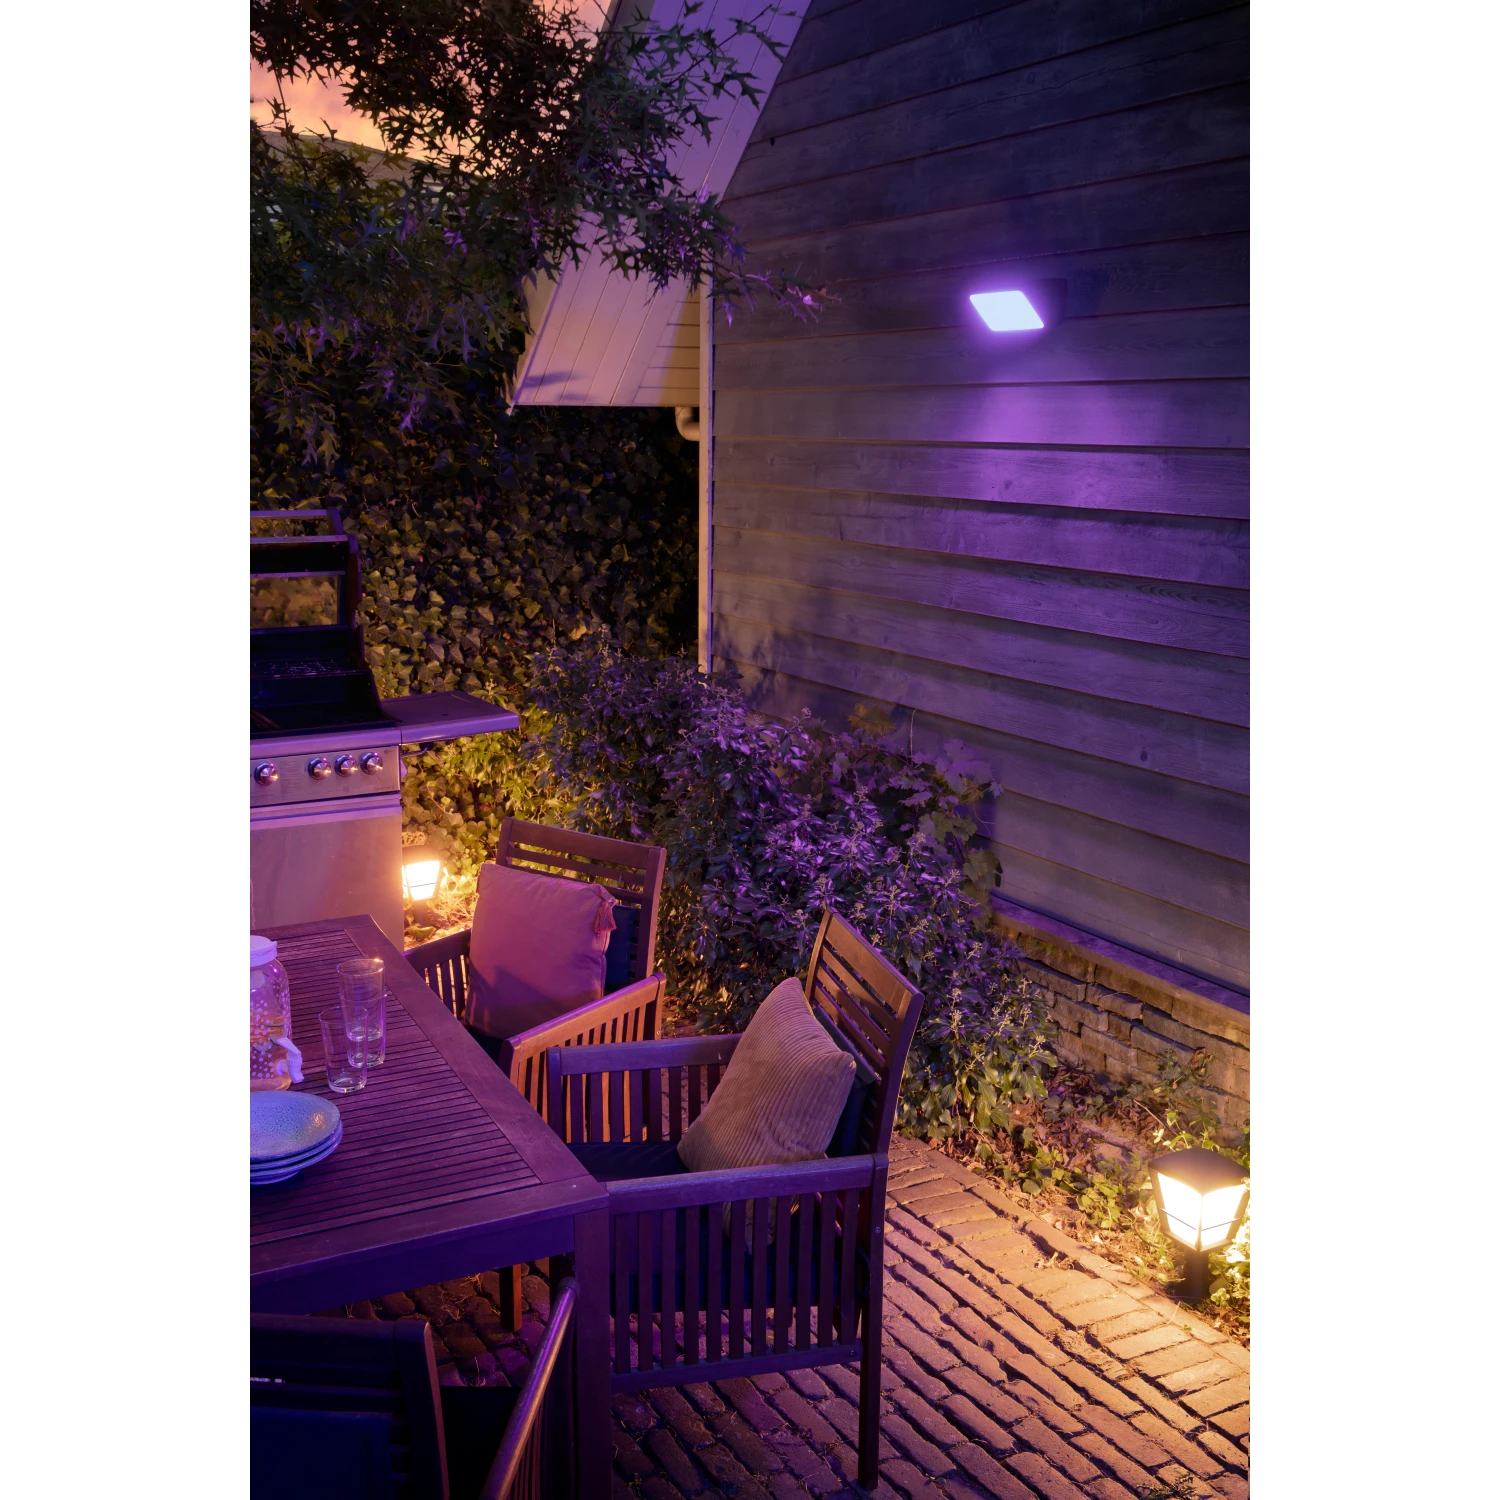 Philips Hue White & Color Ambiance Econic LED-Sockelleuchte